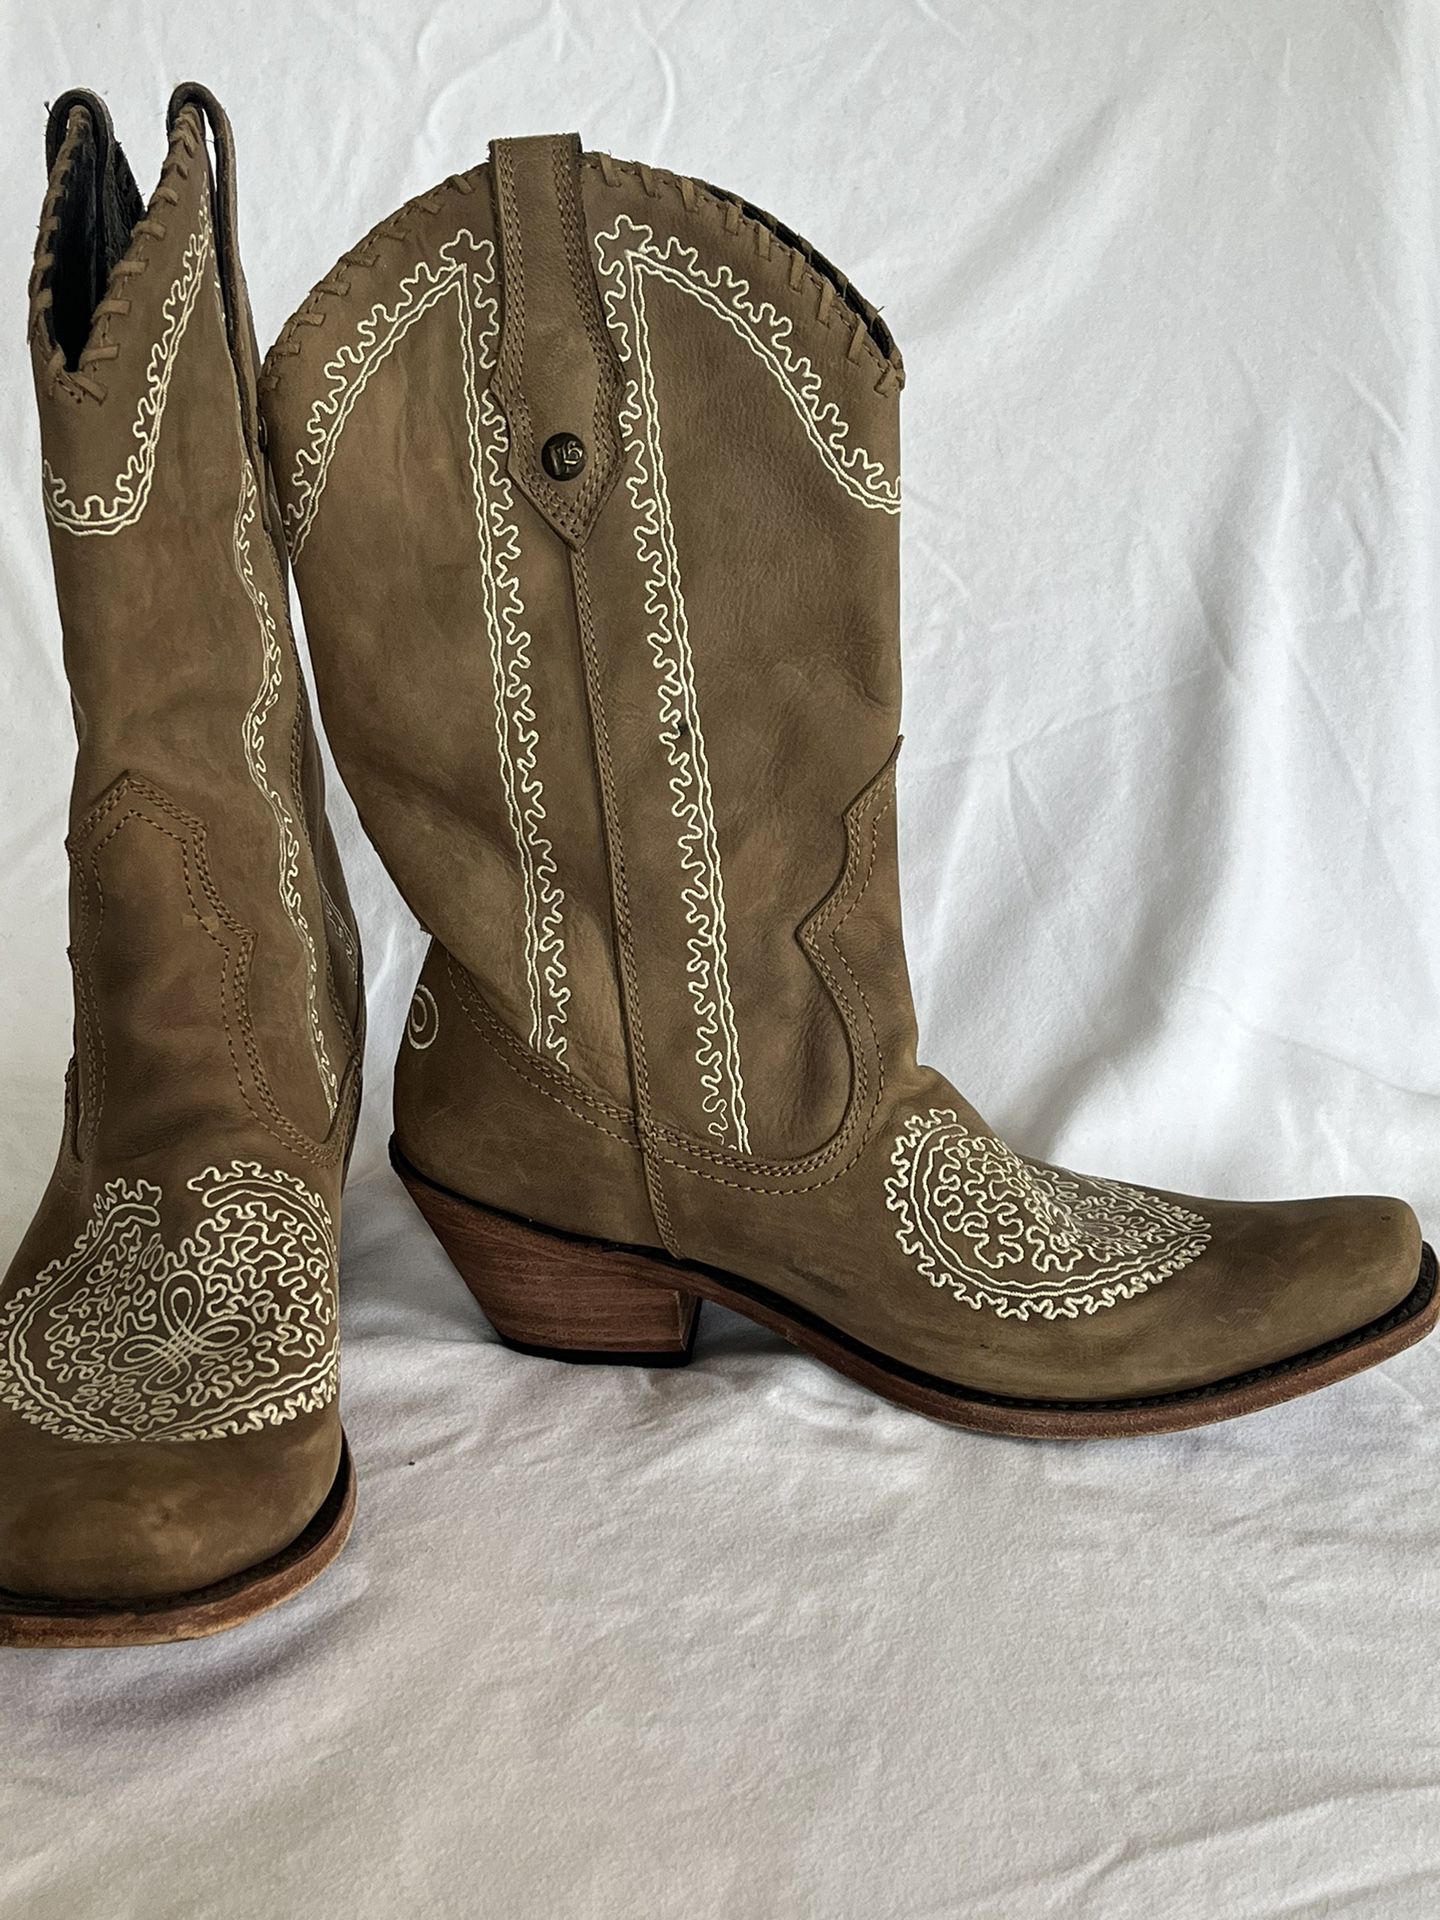 Women's Liberty Black Western/cowgirl style leather boots, tan, size 9.5